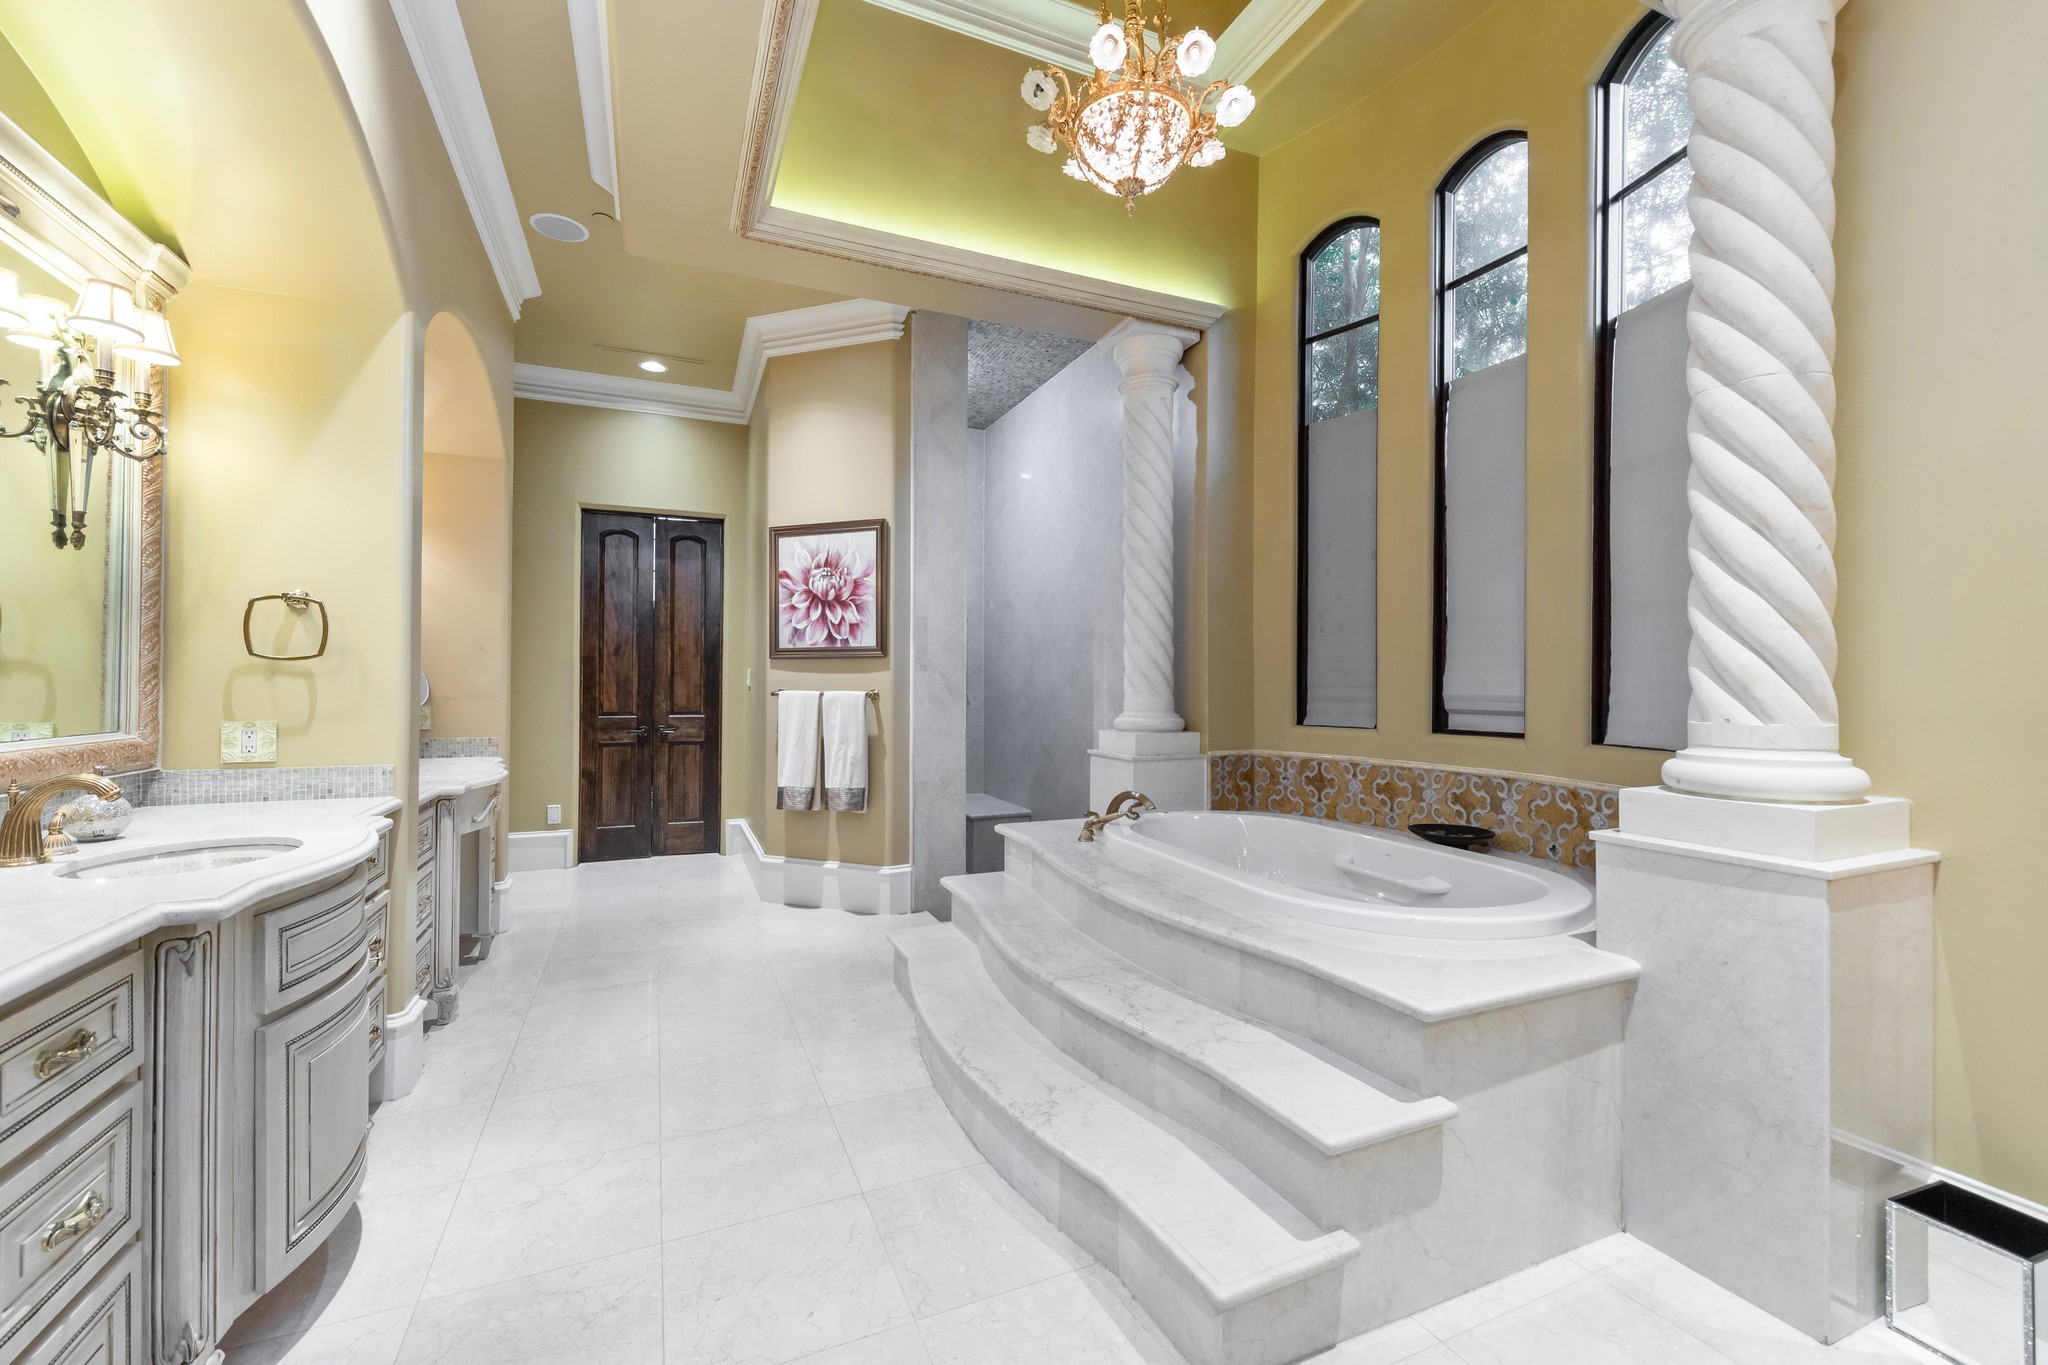 Entering the spa-like bath you will find 14’ barrel ceilings with gorgeous tilework, a custom lavish stone  jetted tub, separate walk in shower,  custom designed cabinets, with his and her massive walk-in closets. 
